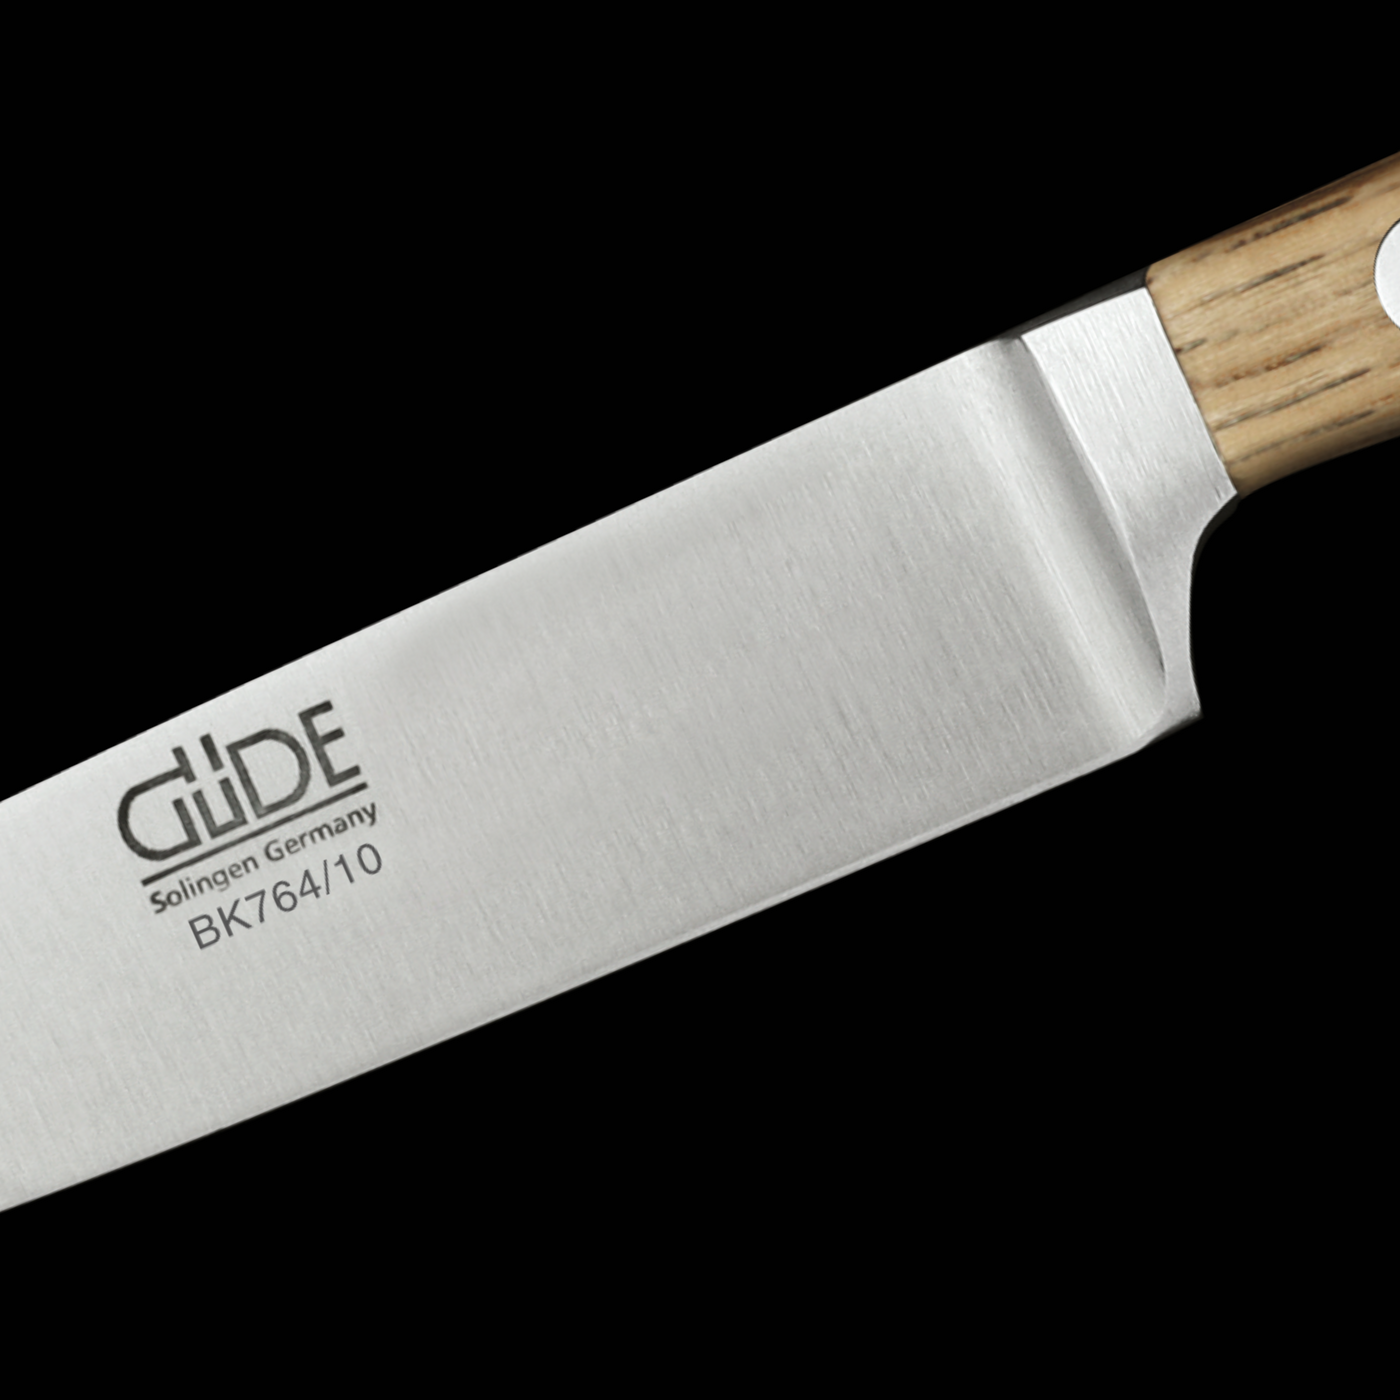 Gude Alpha Paring Knife With Oak Wood Handle, 8-in - Kitchen Universe